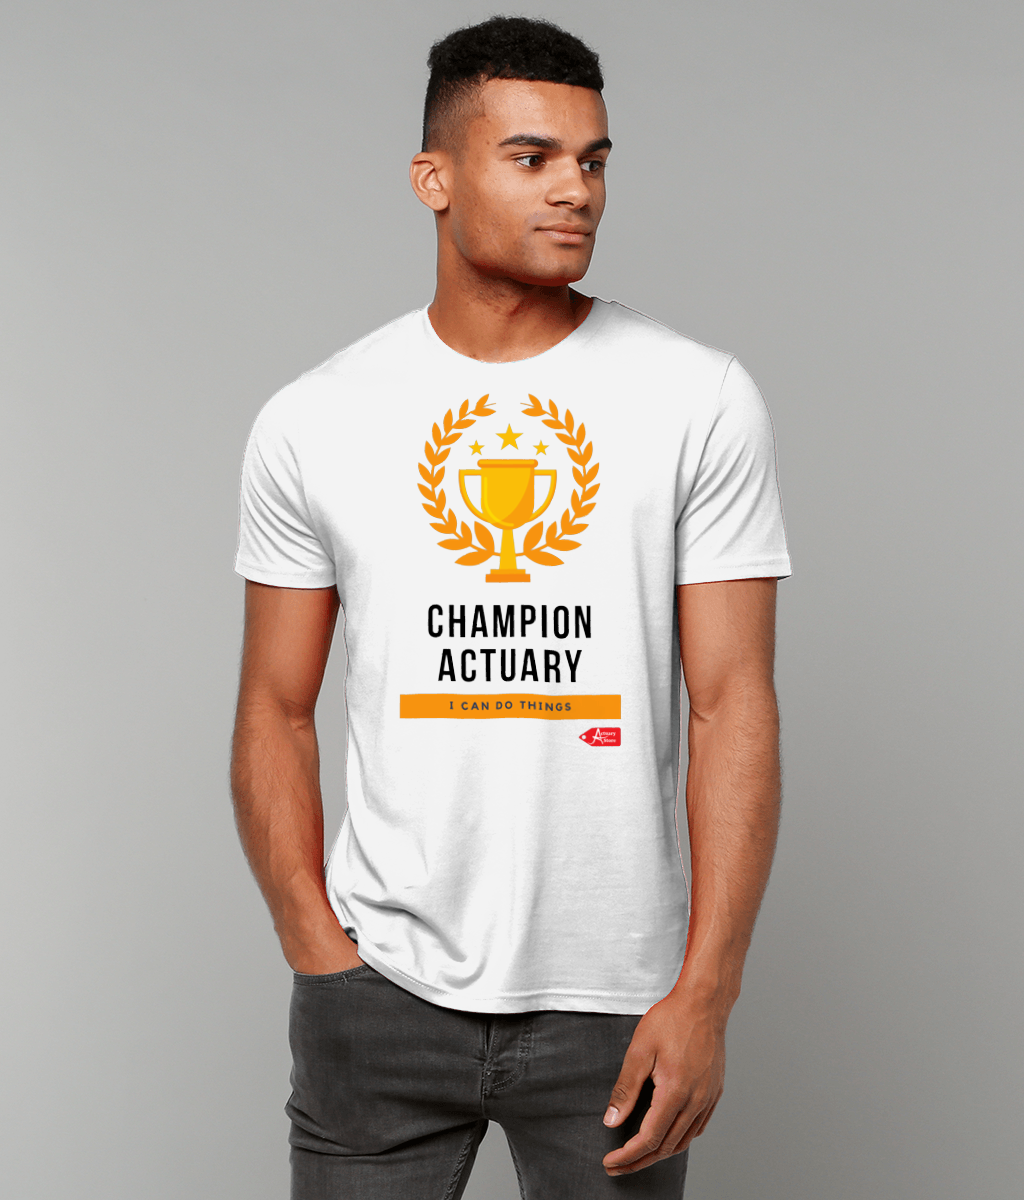 Champion Actuary Trophy White T-shirt